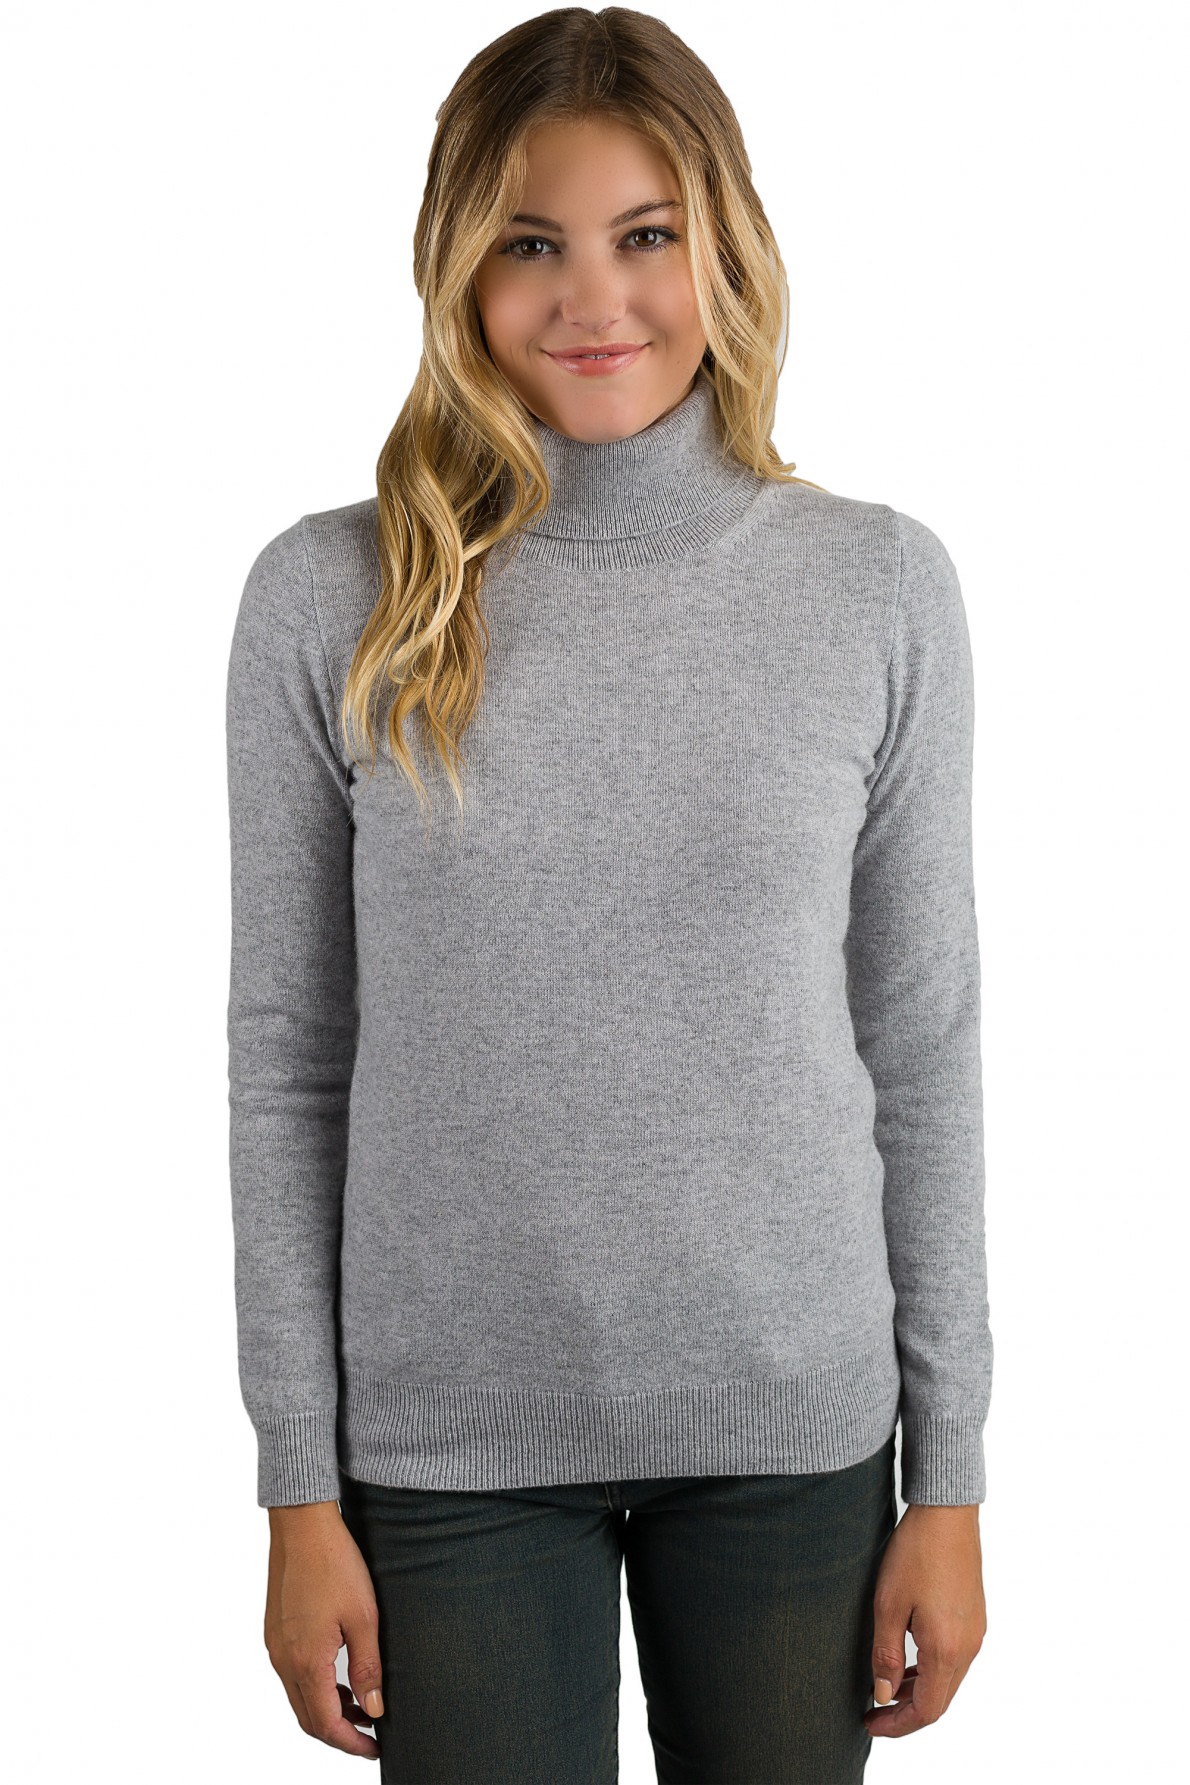 grey cashmere long sleeve turtleneck sweater front view ooqjhin